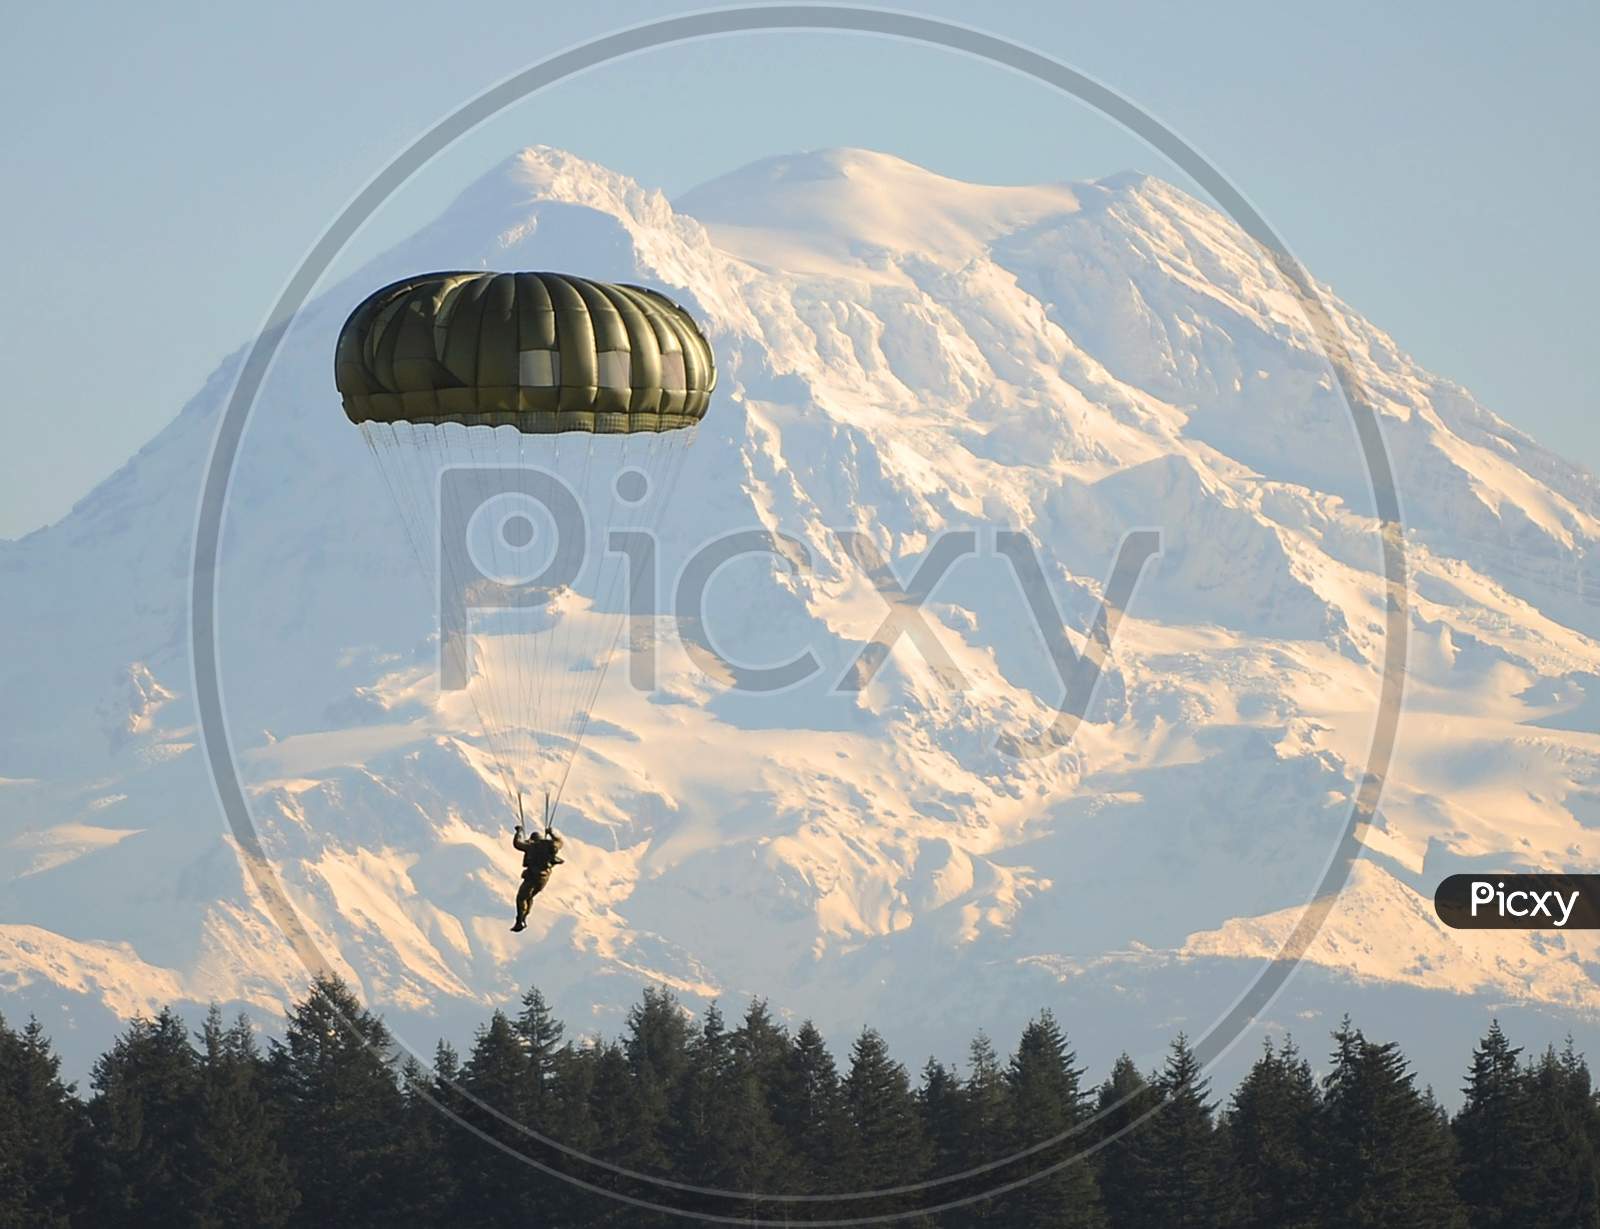 Parachuting In front Of Ice Capped Mountain